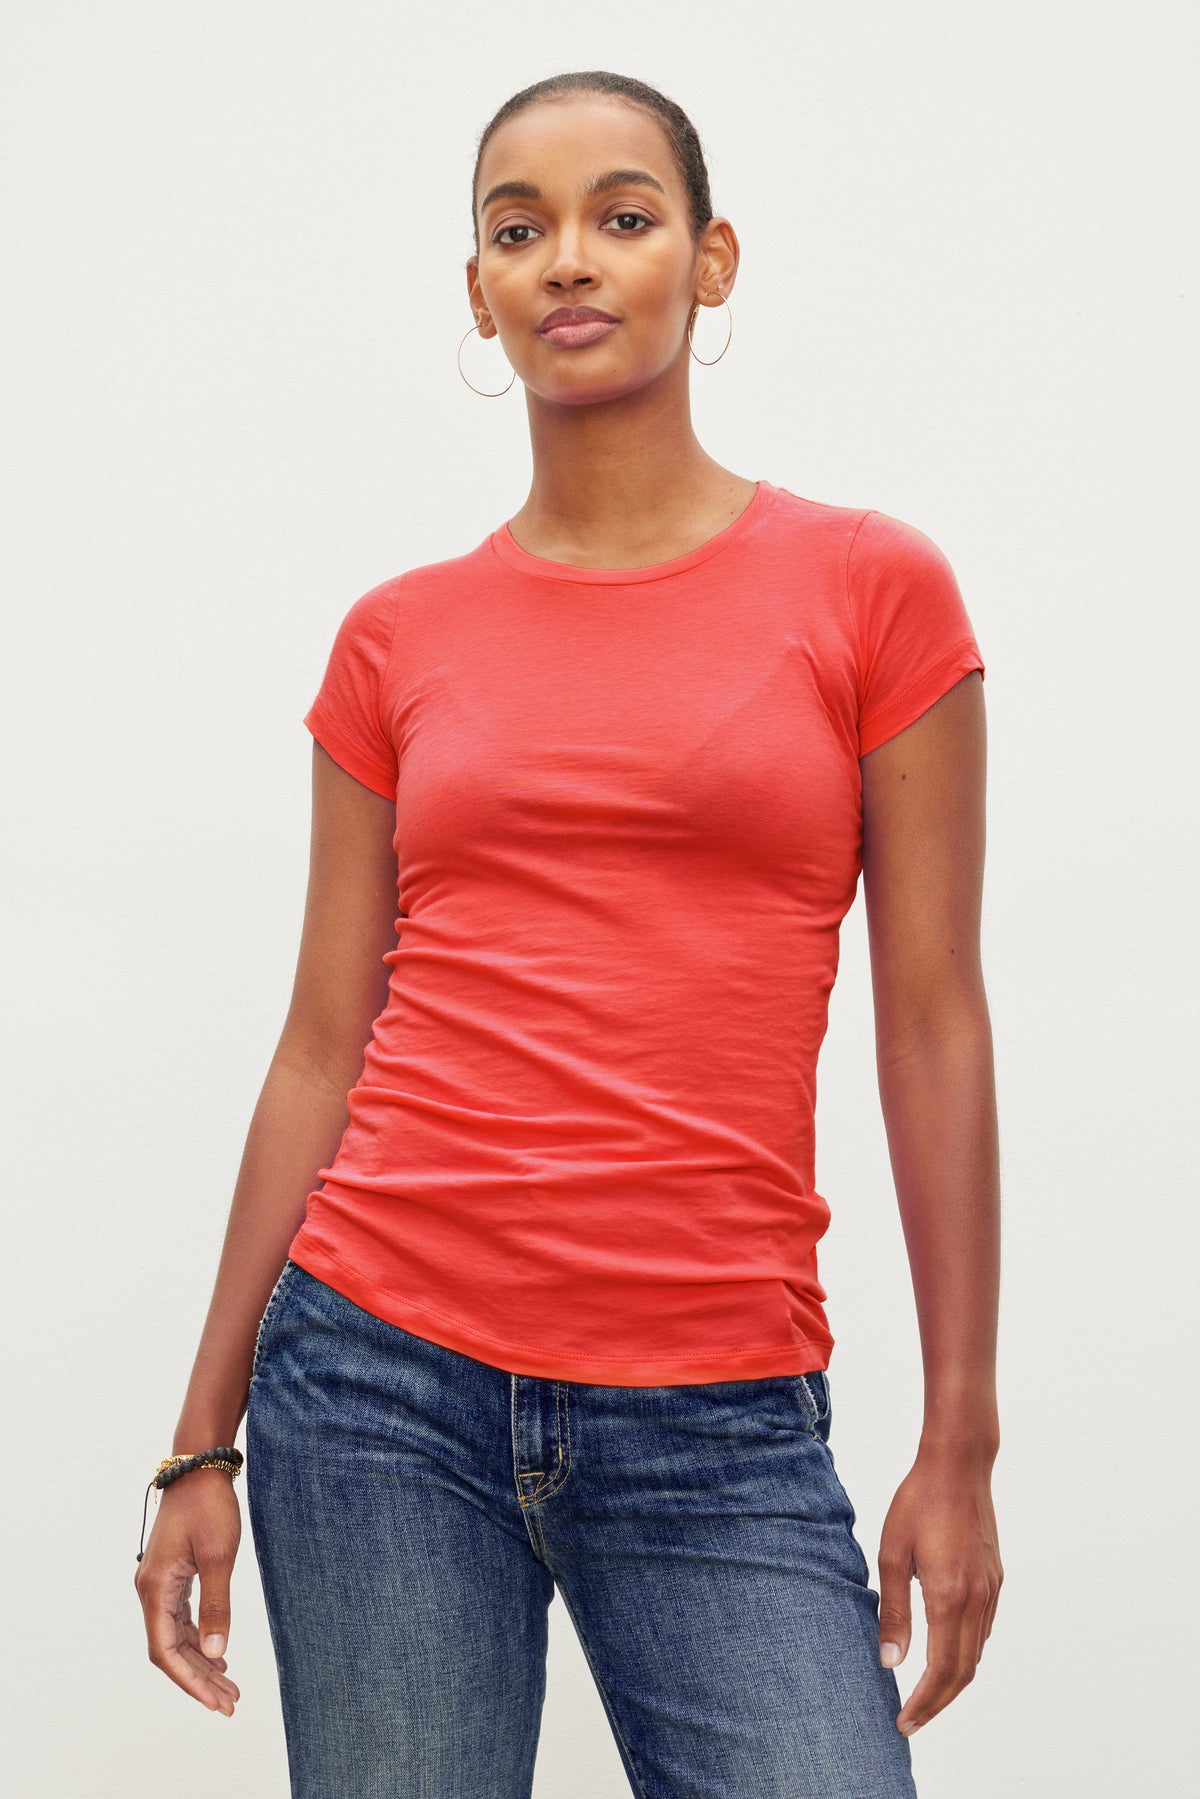   A woman in a JEMMA GAUZY WHISPER FITTED CREW NECK TEE by Velvet by Graham & Spencer and blue jeans standing against a white background. 